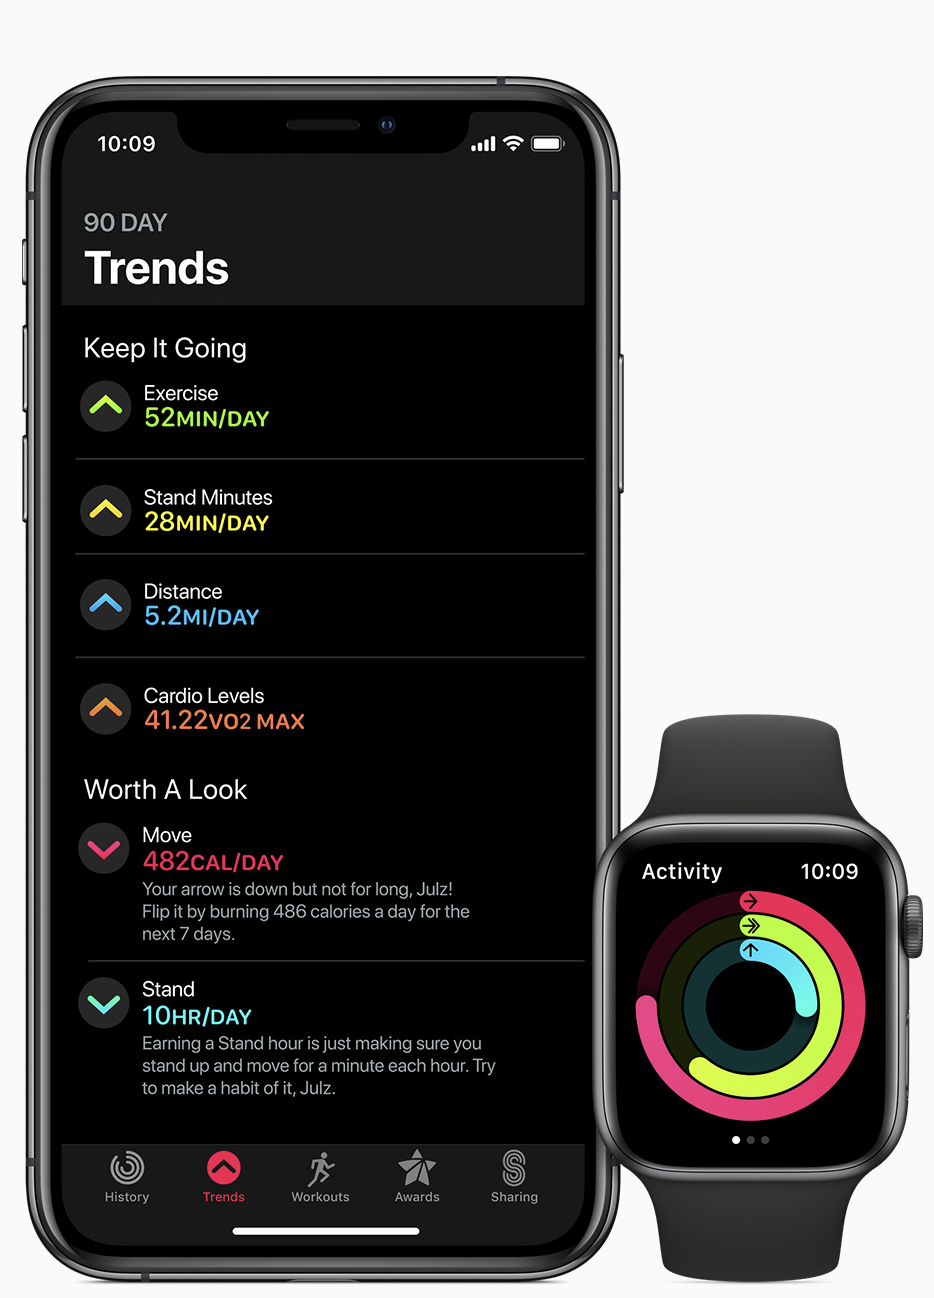 watchOS advances health, fitness capabilities of the Apple Watch